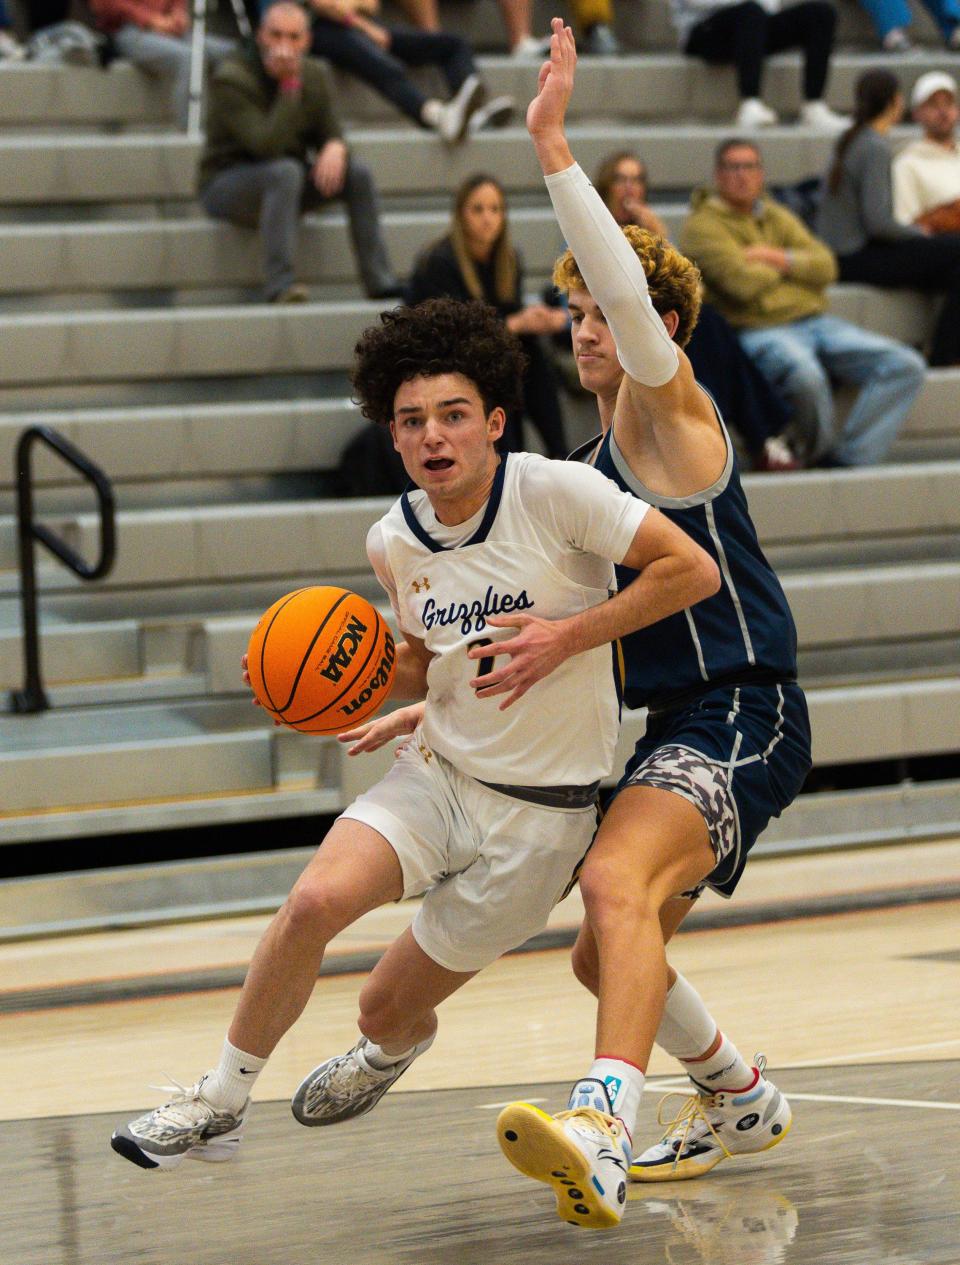 Copper Hills High School’s Isaiah Reiser drives the ball with Crimson Cliffs High School’s Luke Johnson on defense during a boys basketball semifinal game of the Allstate Falcon Classic at Skyridge High School in Lehi on Friday, Dec. 8, 2023. | Megan Nielsen, Deseret News